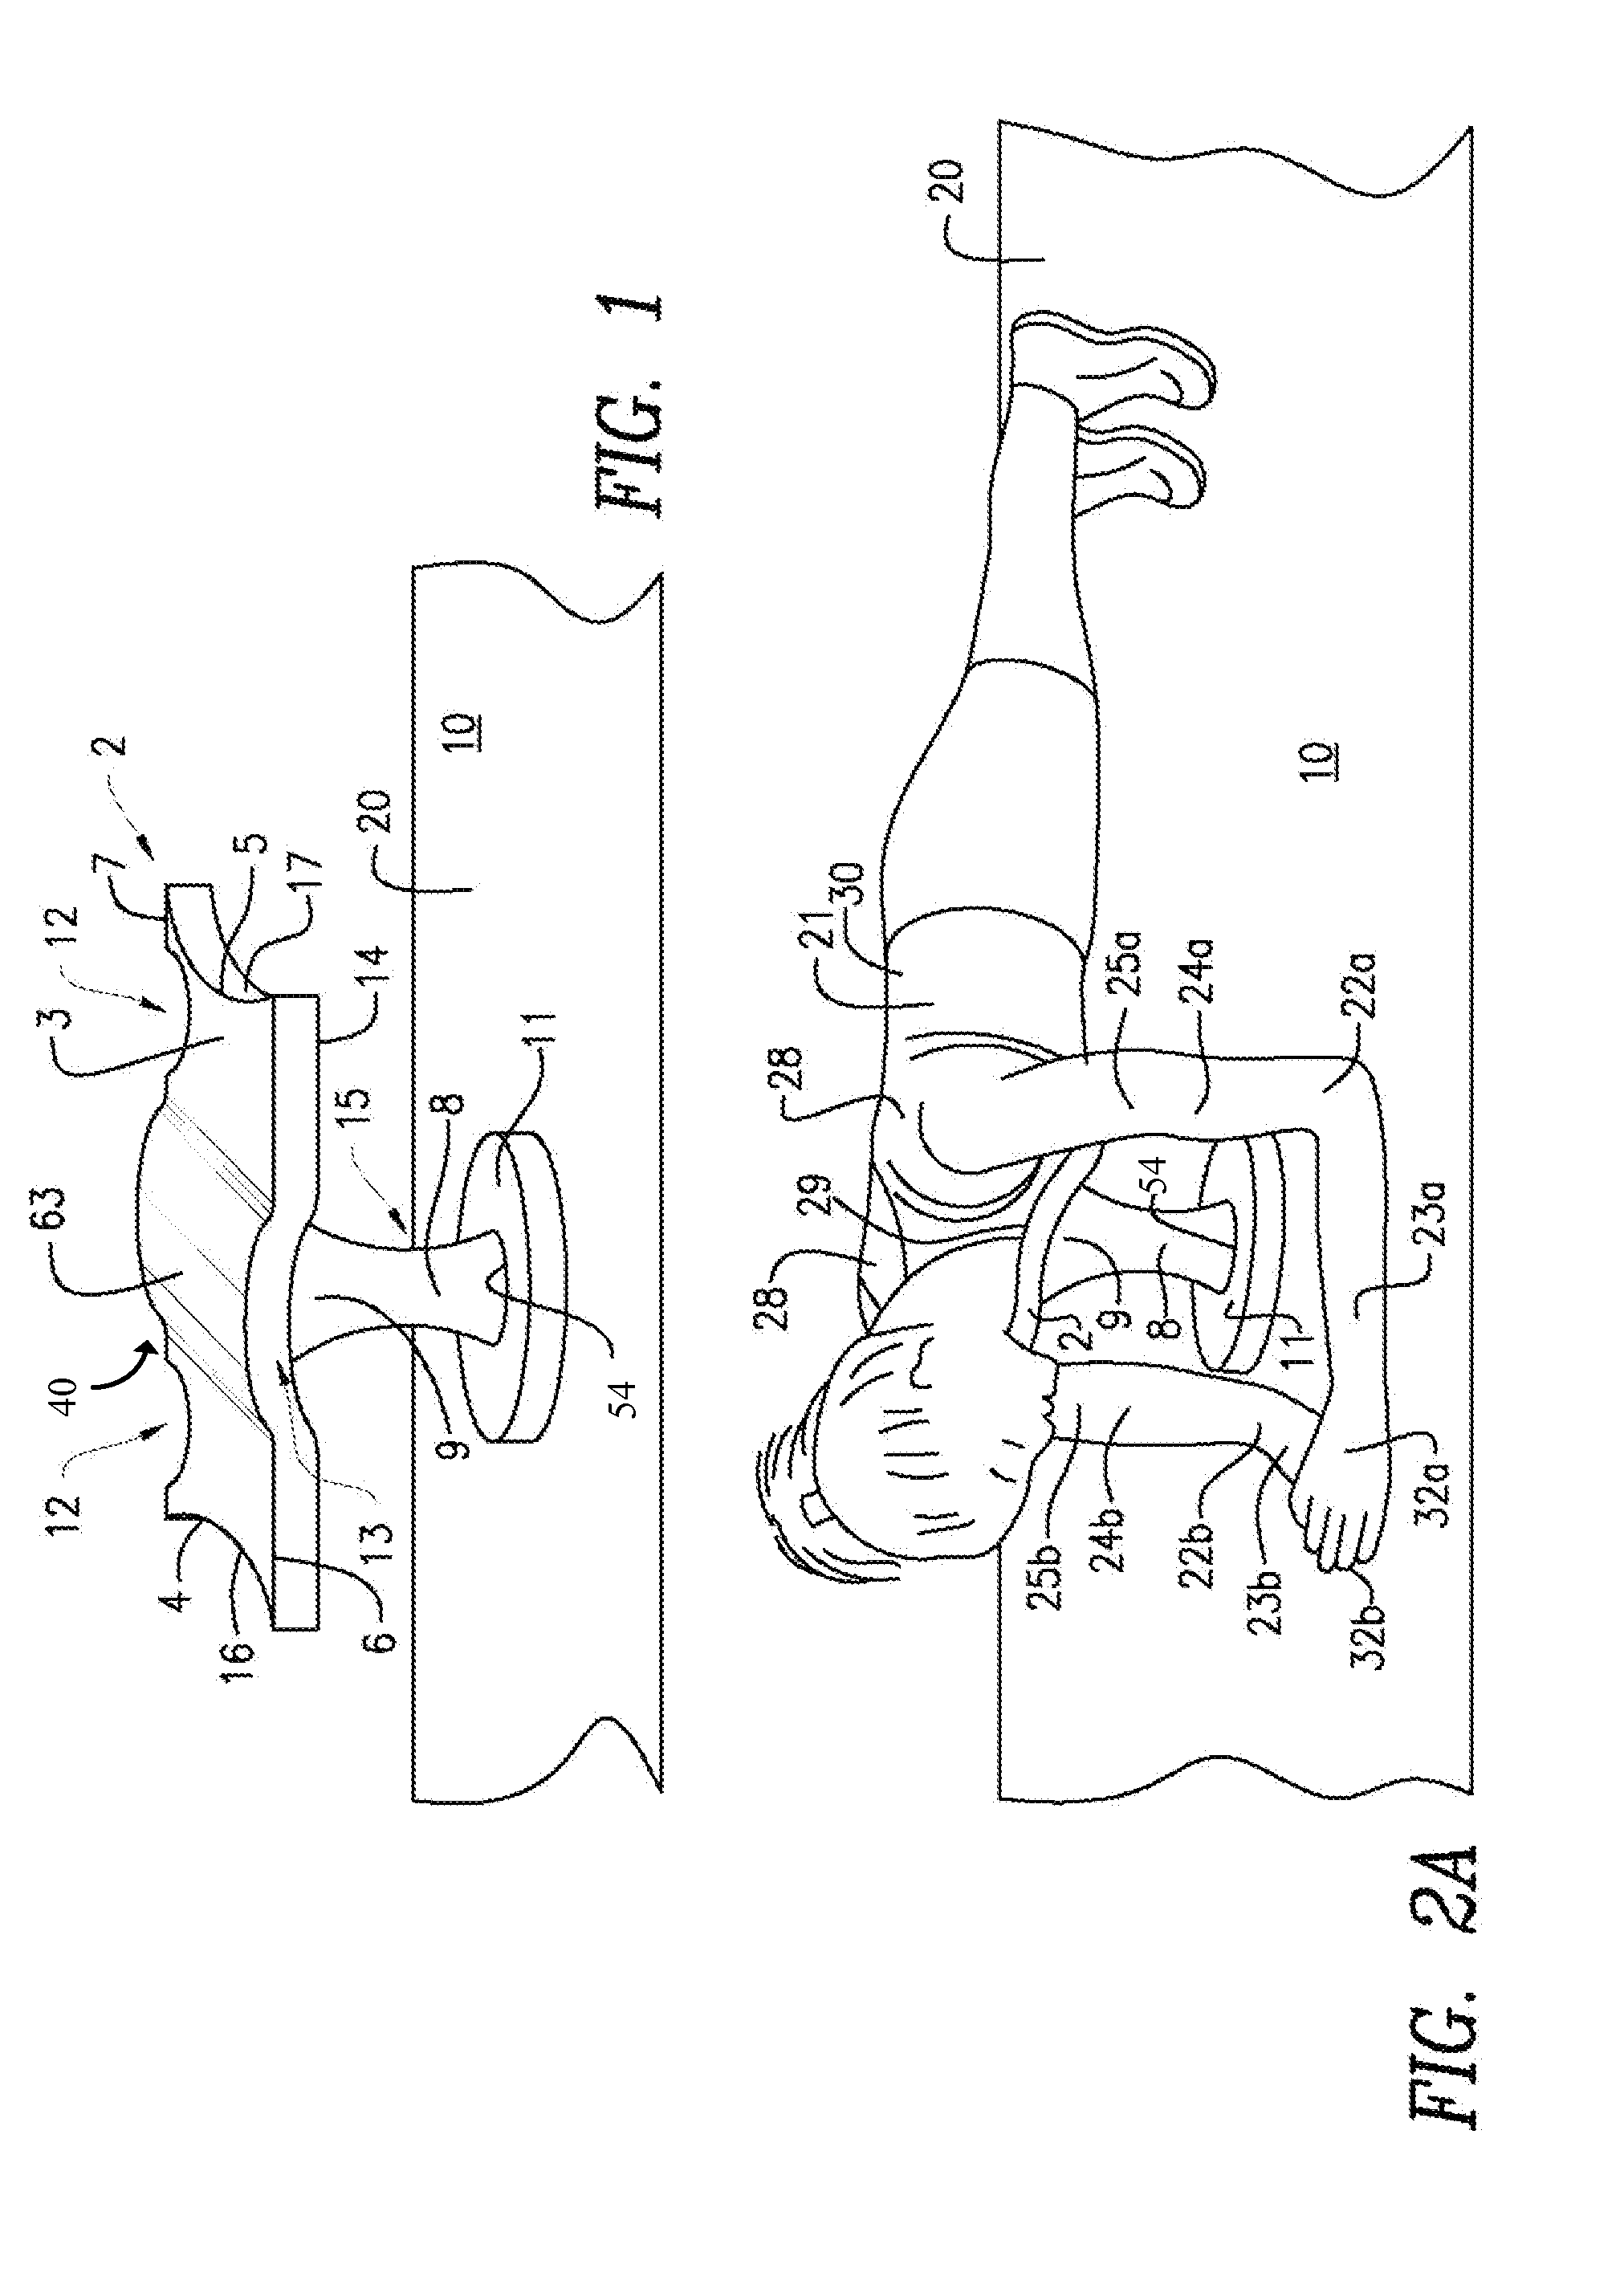 Apparatus for providing support when performing plank training exercises and methods of manufacturing and using same